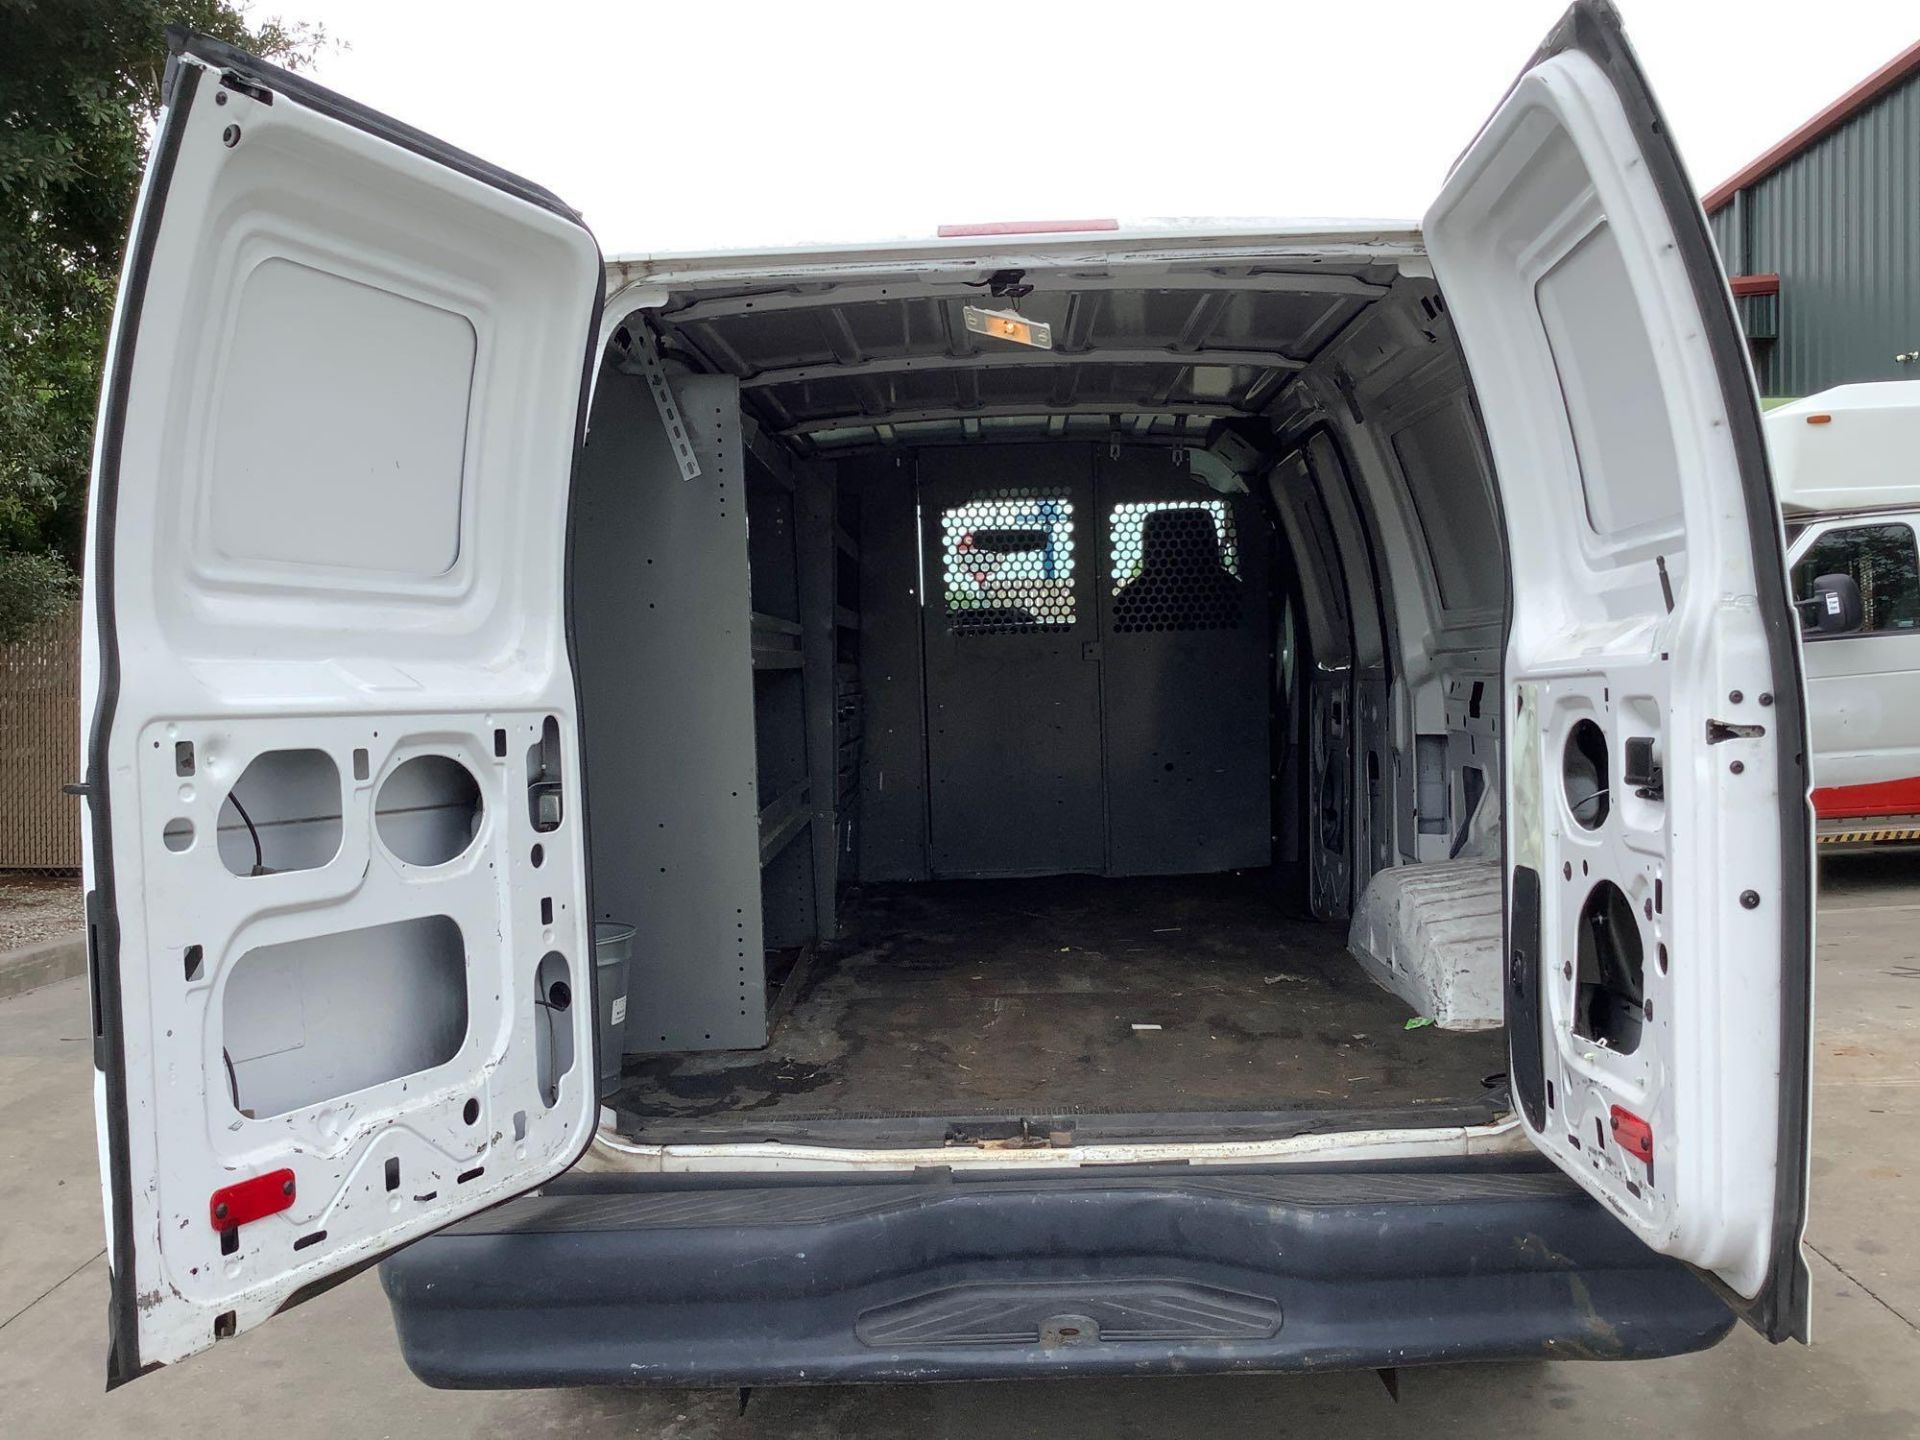 2010 FORD E-SERIES E-150 CARGO VAN, AUTOMATIC, RWD, APPROX GVWR 8520 LBS, STANDARD AC/HEAT AIR CONDI - Image 8 of 27